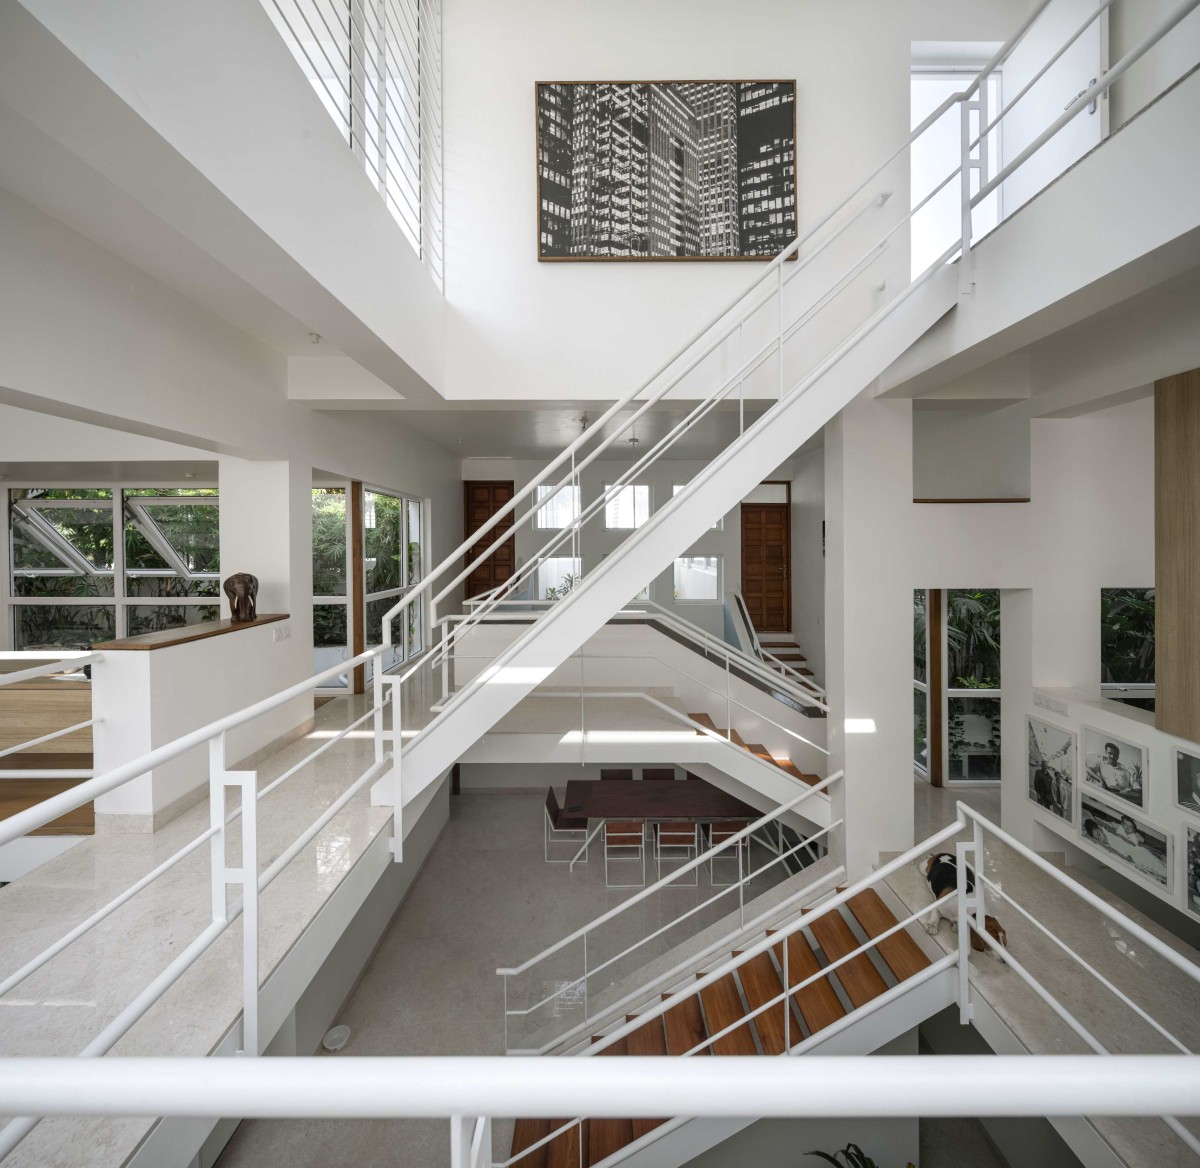 Interior view of Veiled House by Gaurav Roy Choudhury Architects 8456